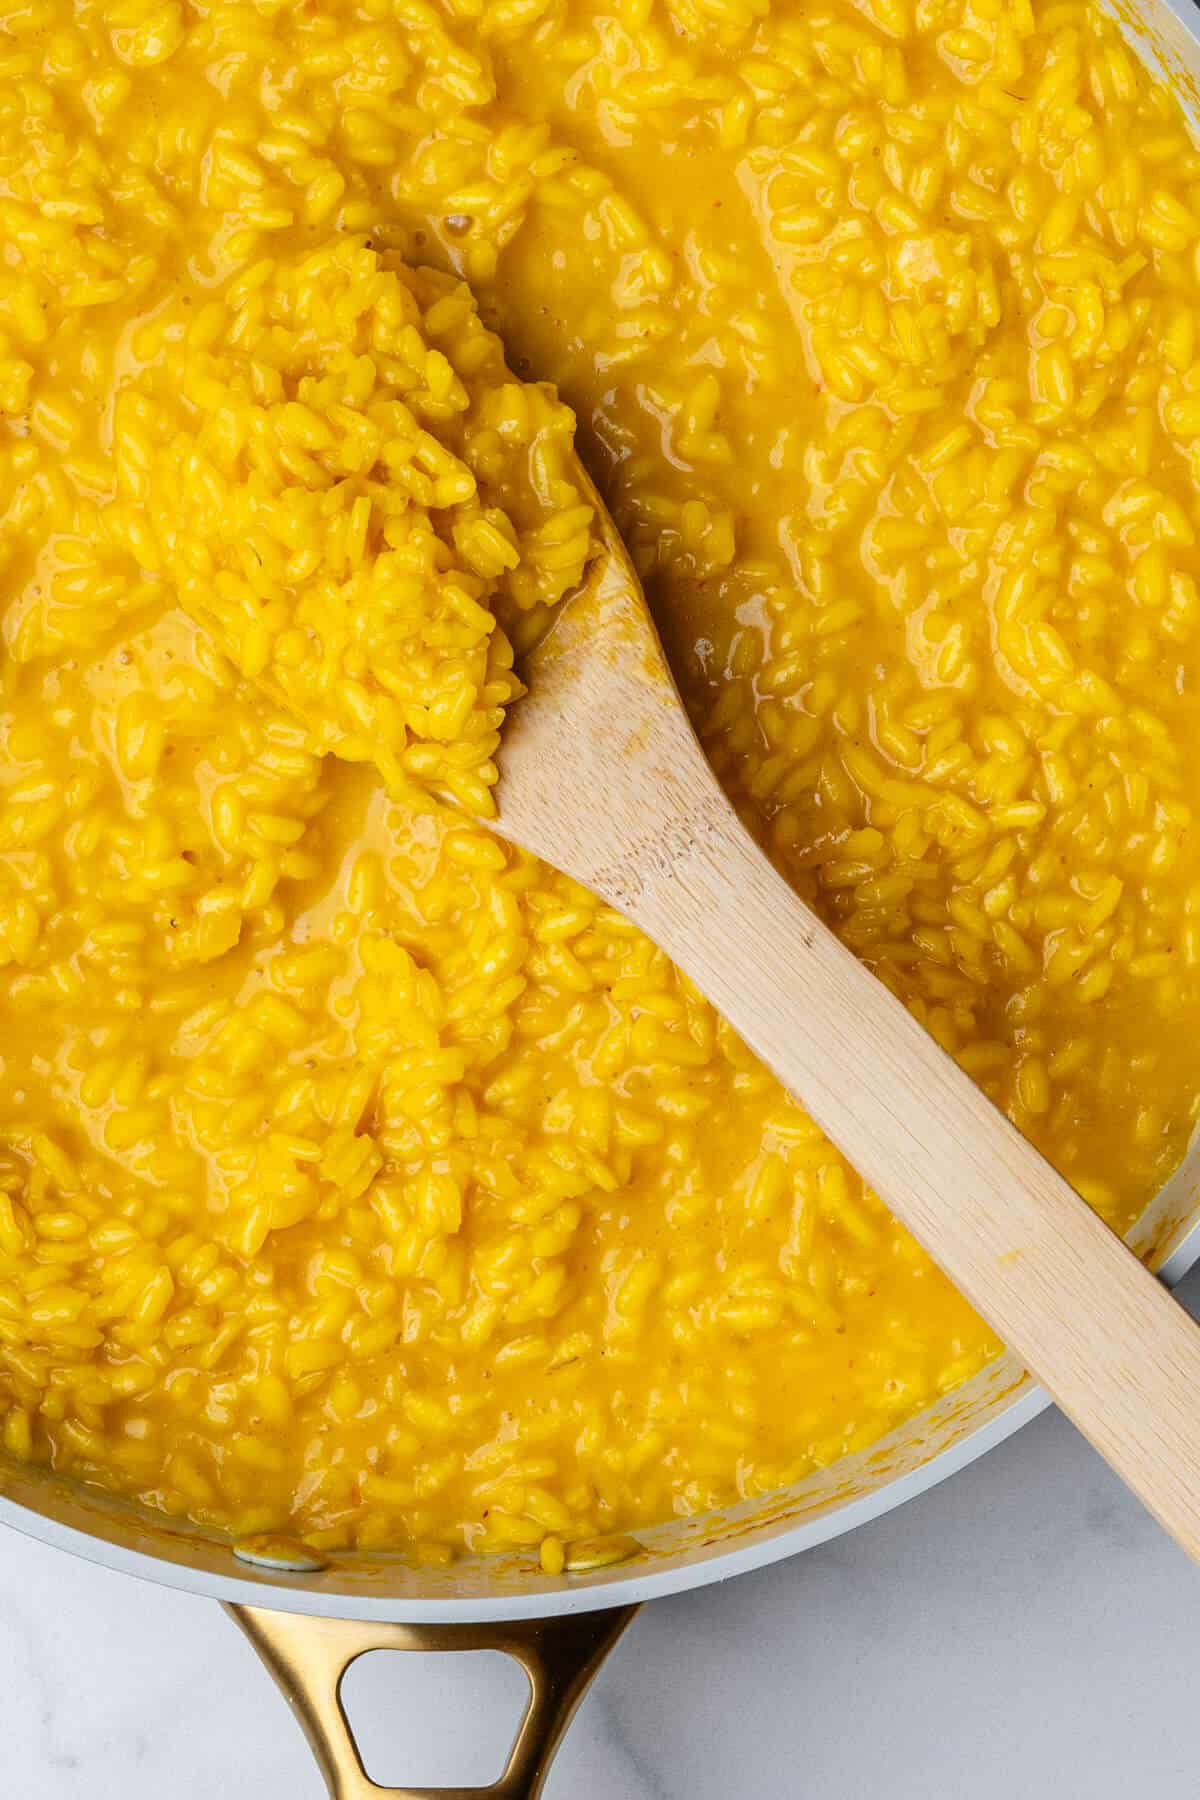 Wooden spoon in a pan of Saffron Risotto